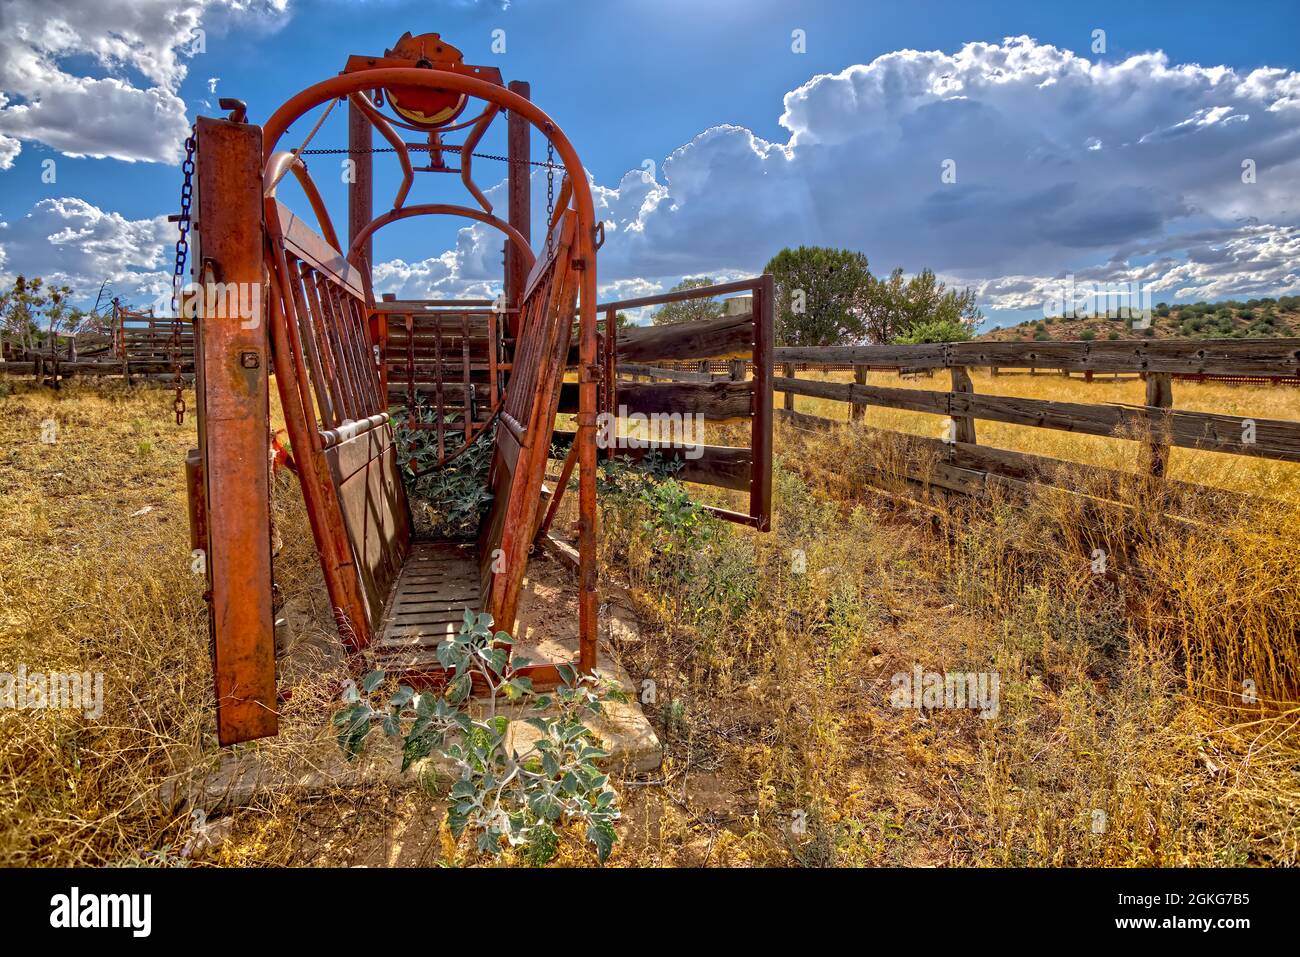 A device for restraining cows at a forgotten cattle corral in the Prescott National Forest east of Paulden Arizona. The area is publicly accessible fe Stock Photo